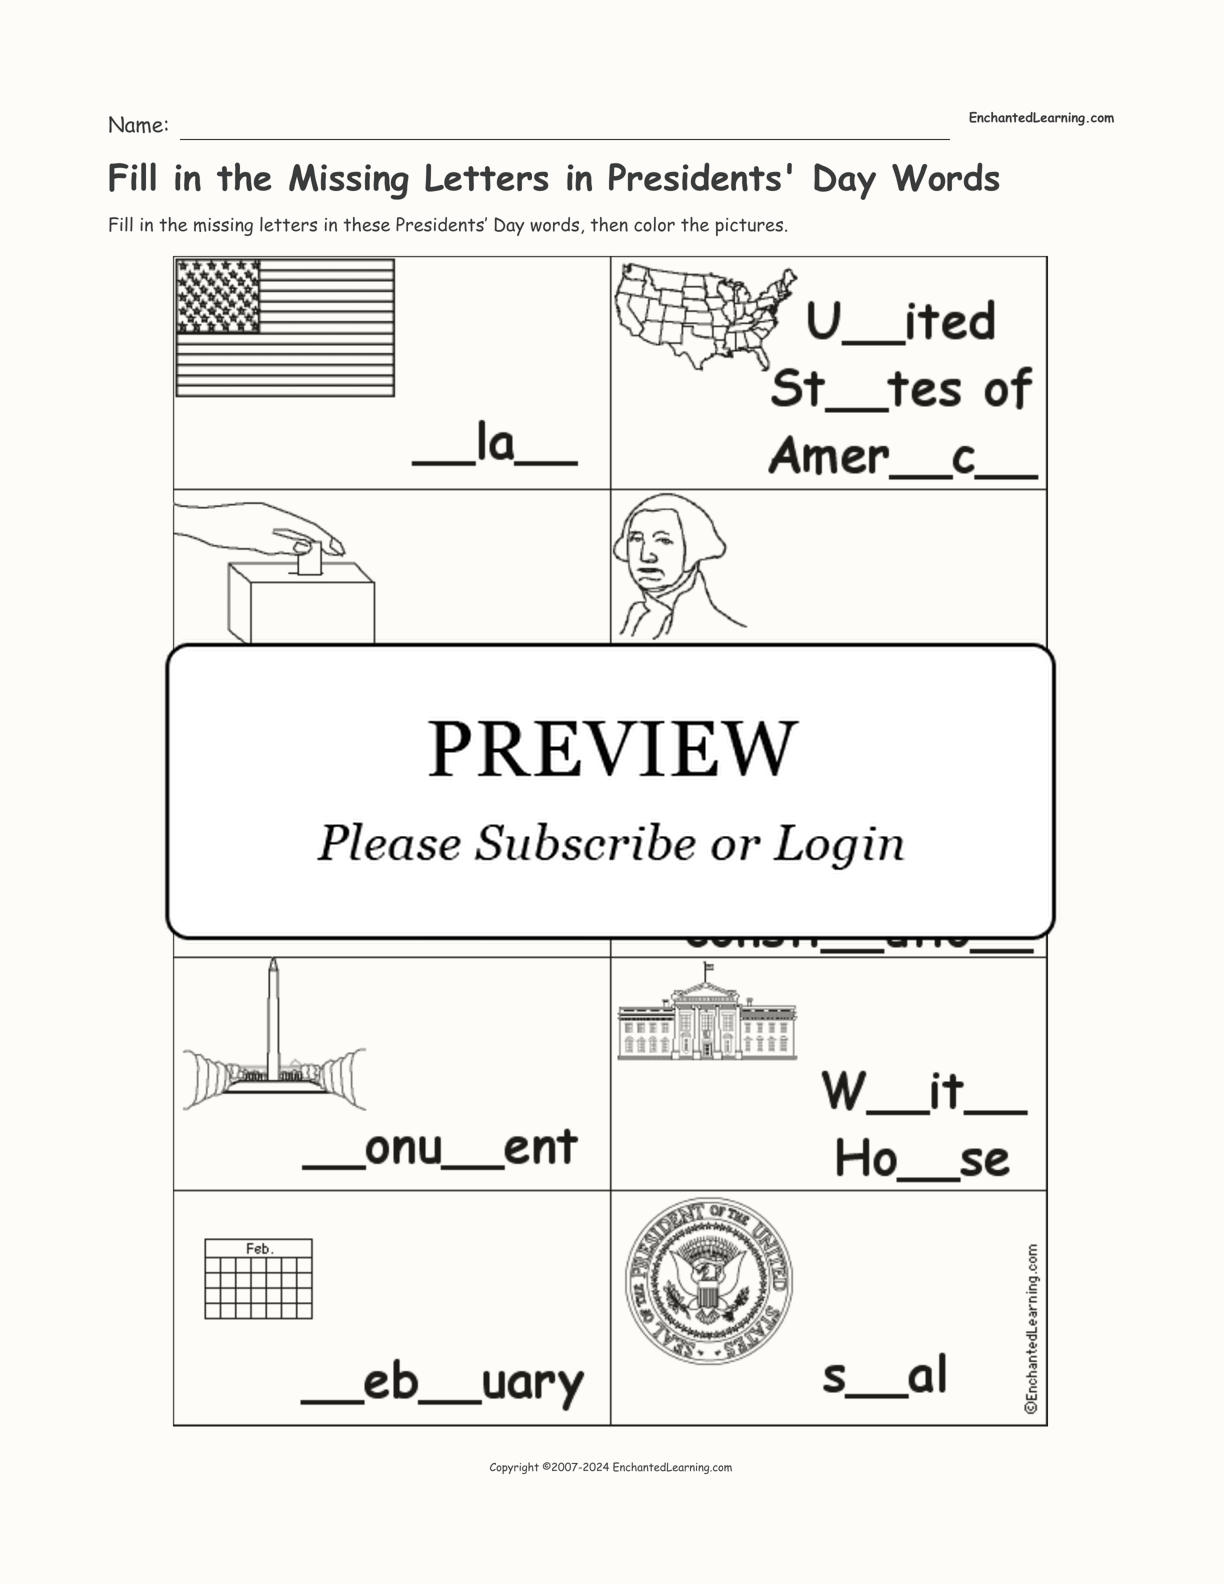 Fill in the Missing Letters in Presidents' Day Words interactive worksheet page 1